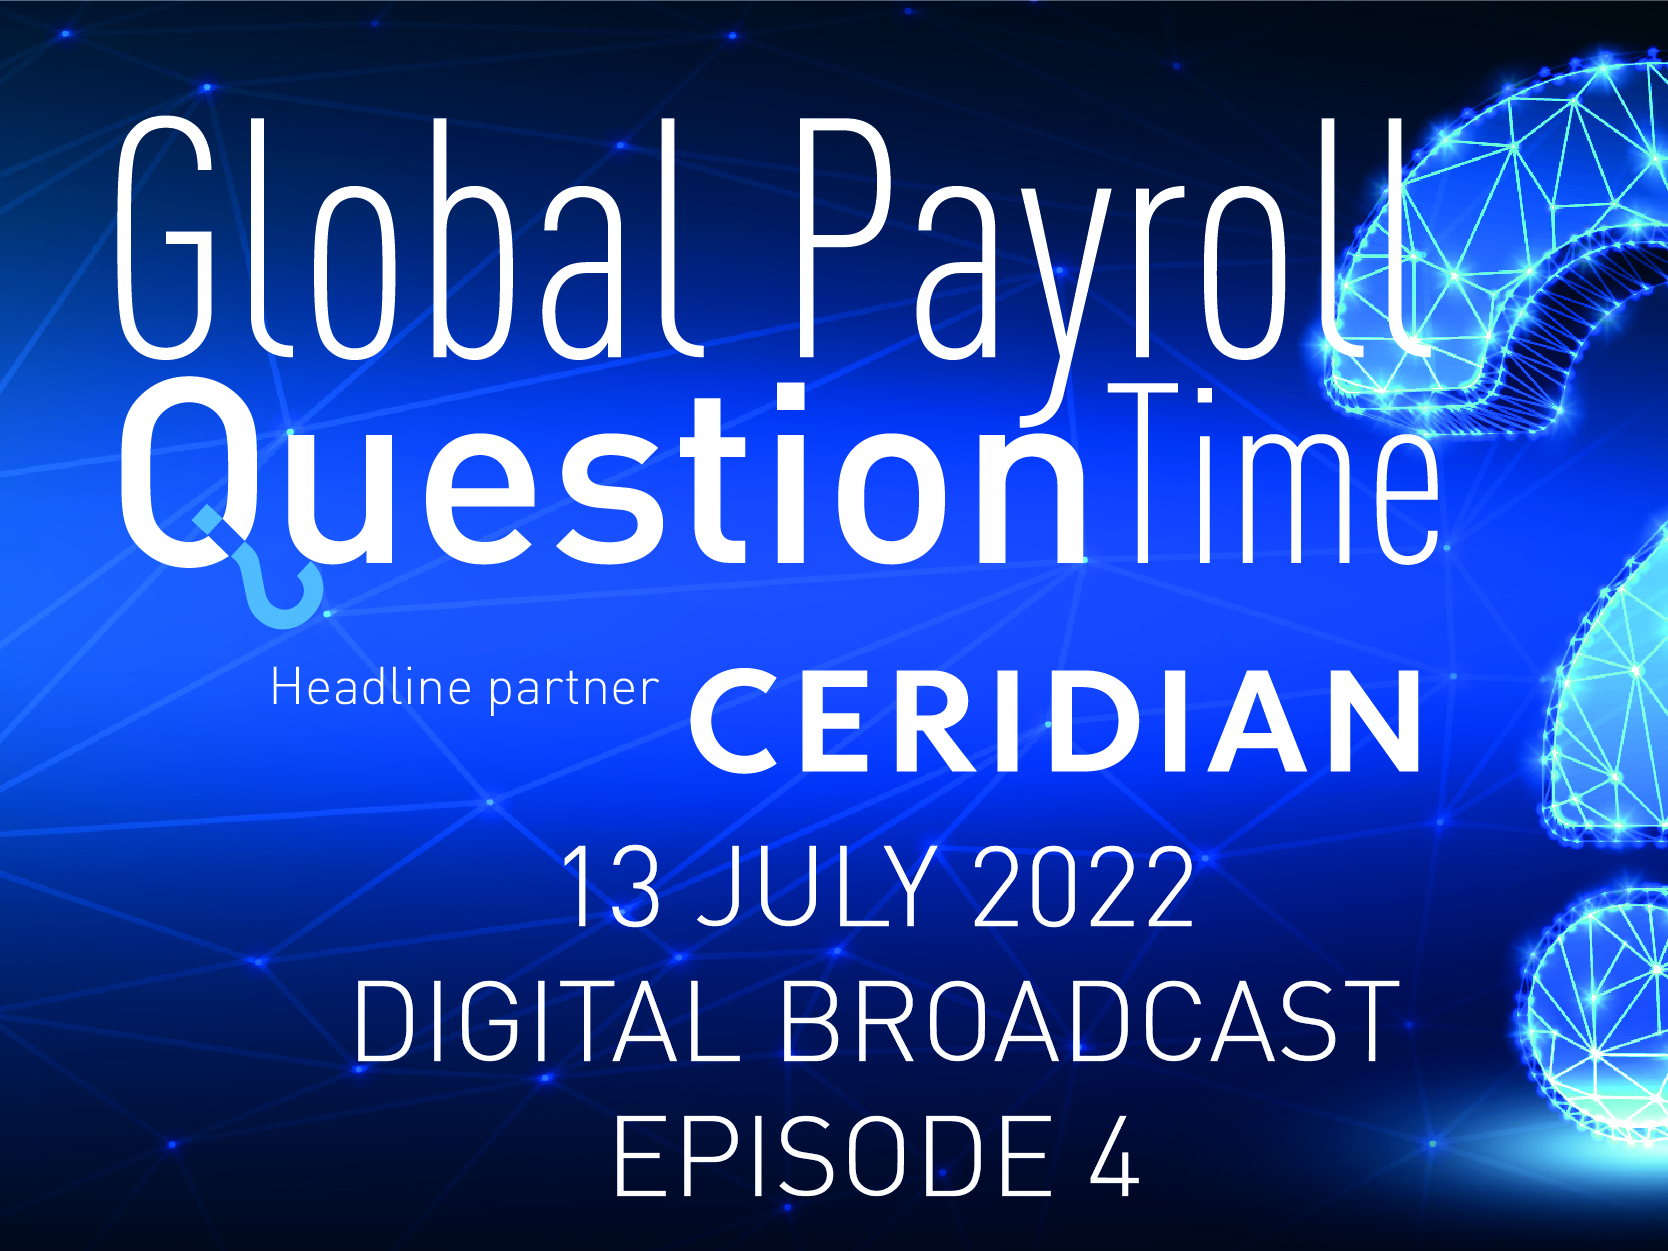 Global Payroll Question Time - EPISODE 4